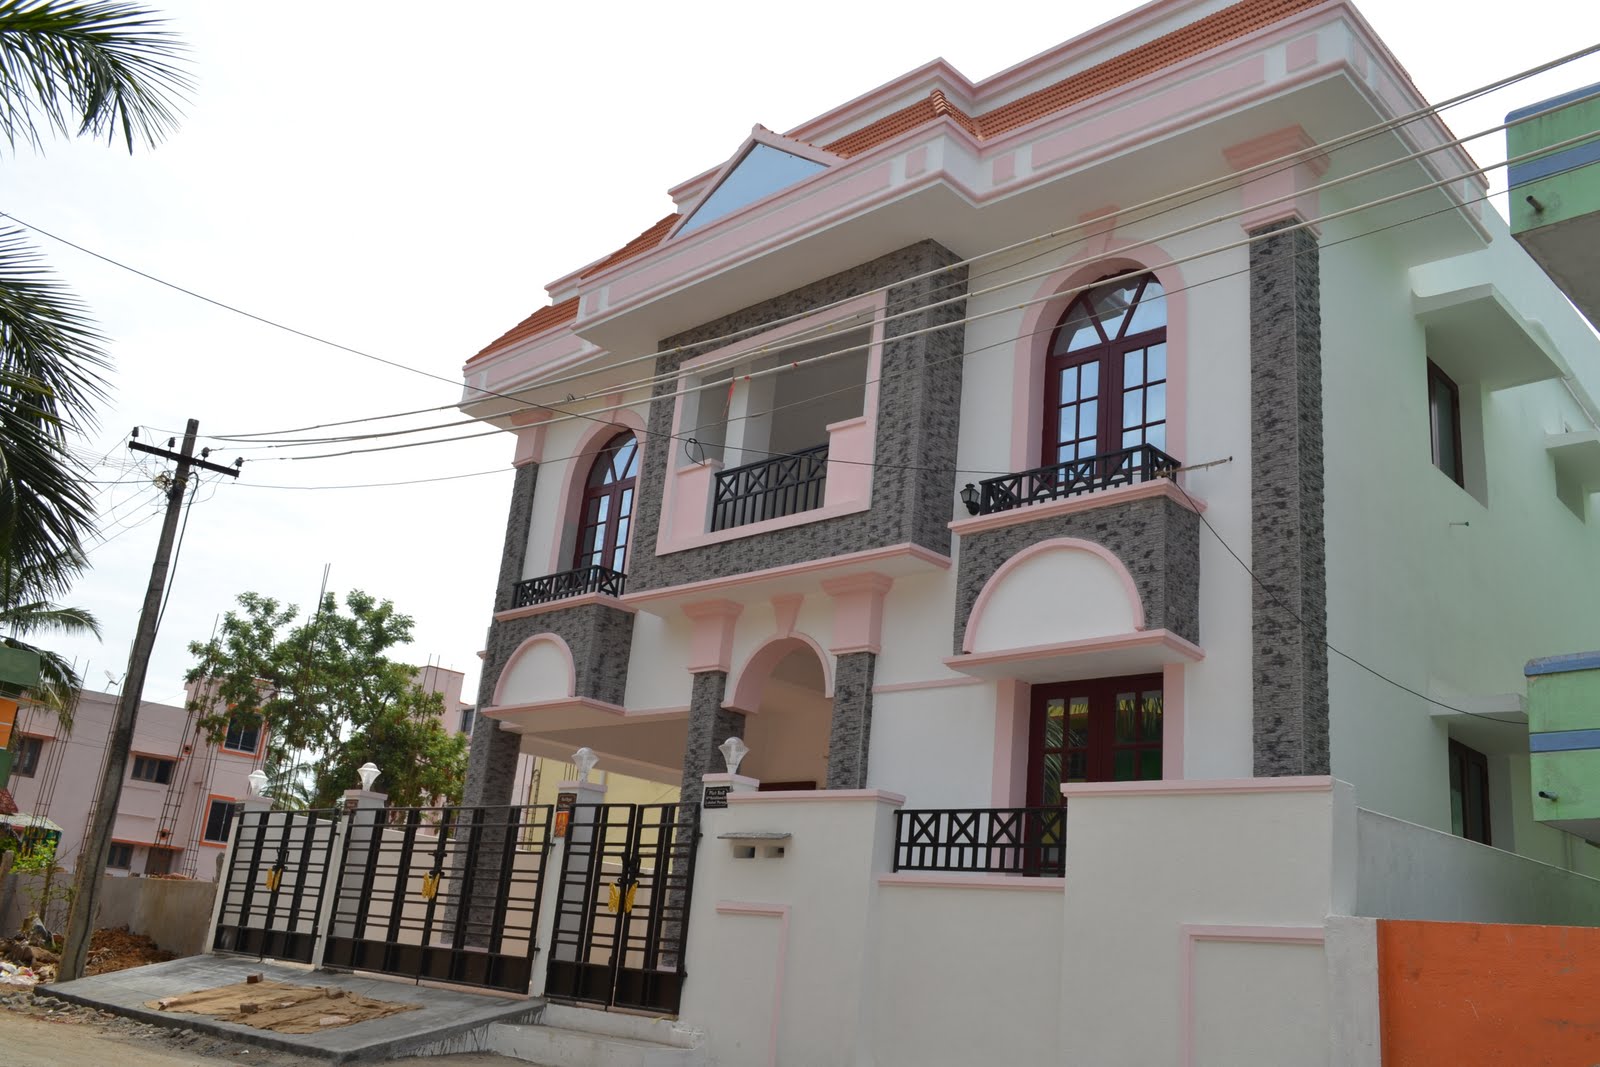 Recently Constructed building at chromepet for dr bhagavathy yeramilli at chrompet on contract